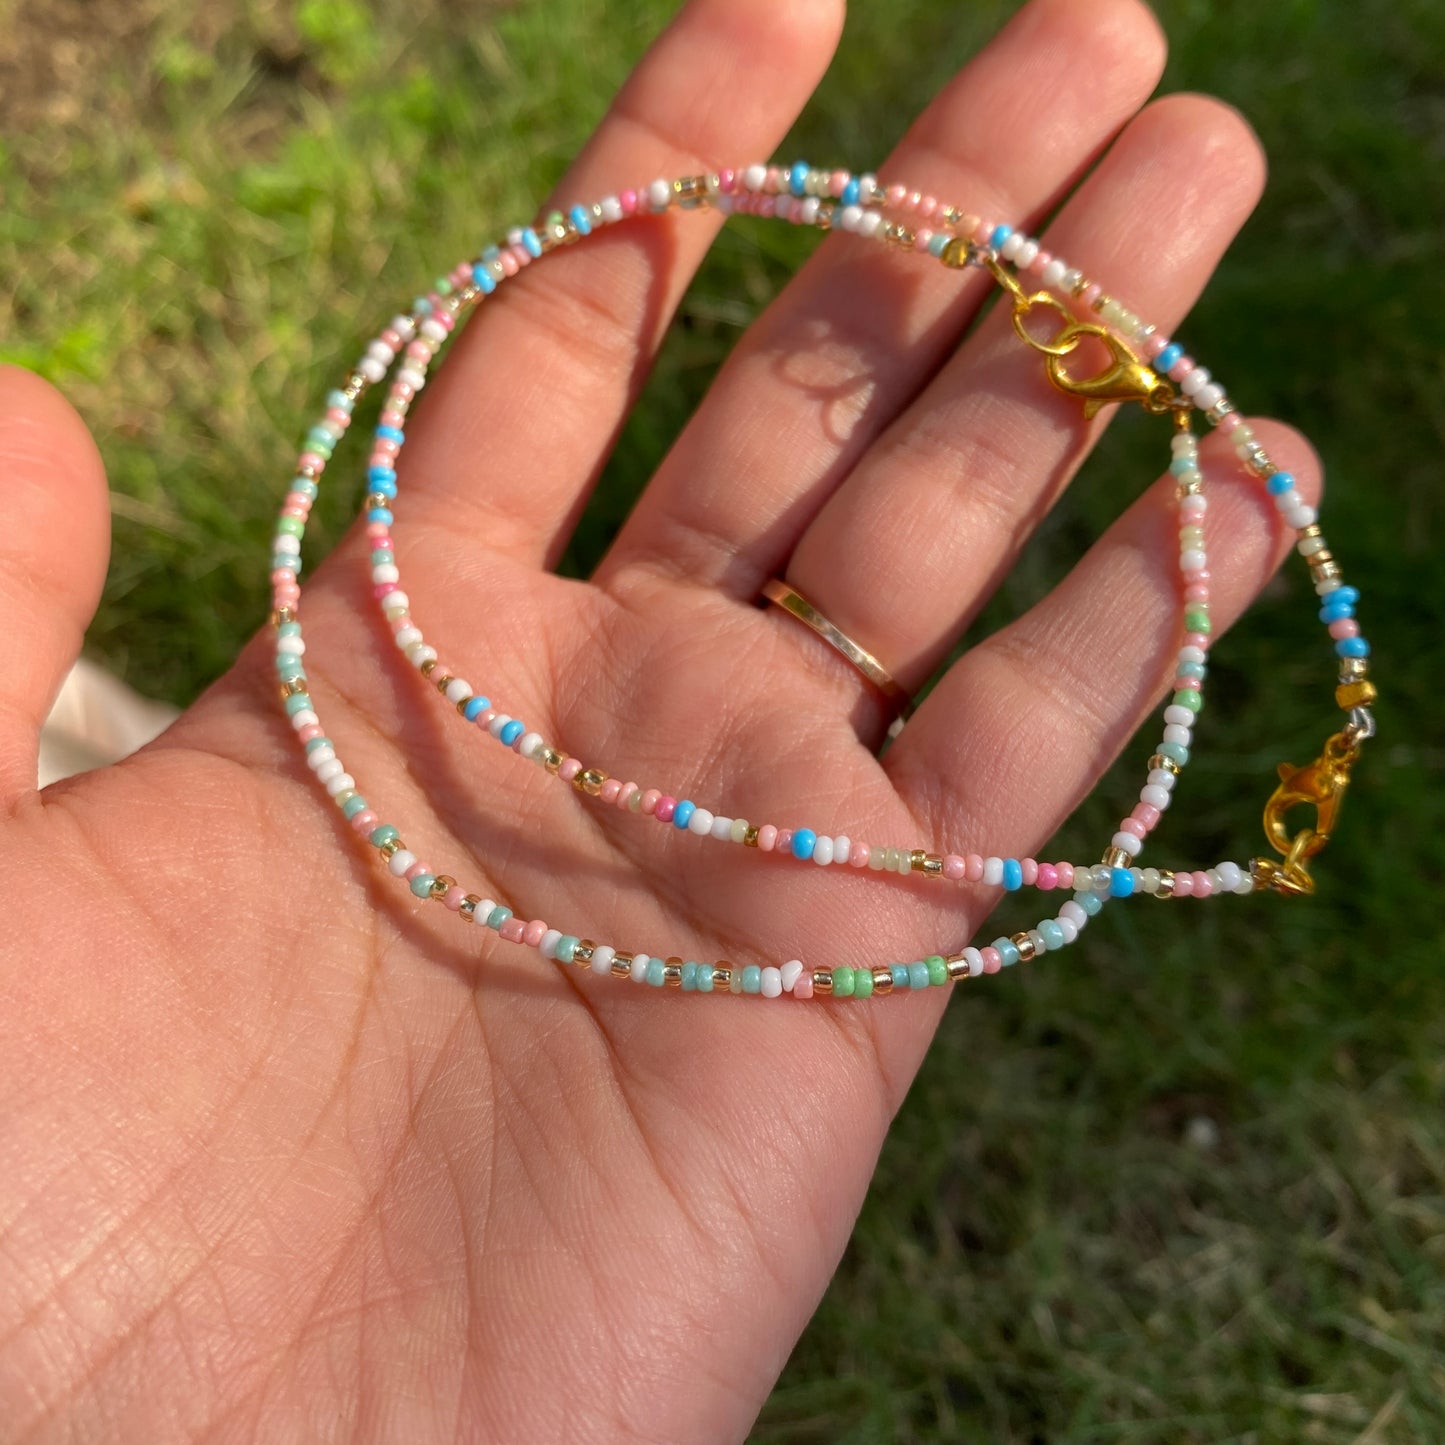 Blueish and Greenish Pastel Anklets